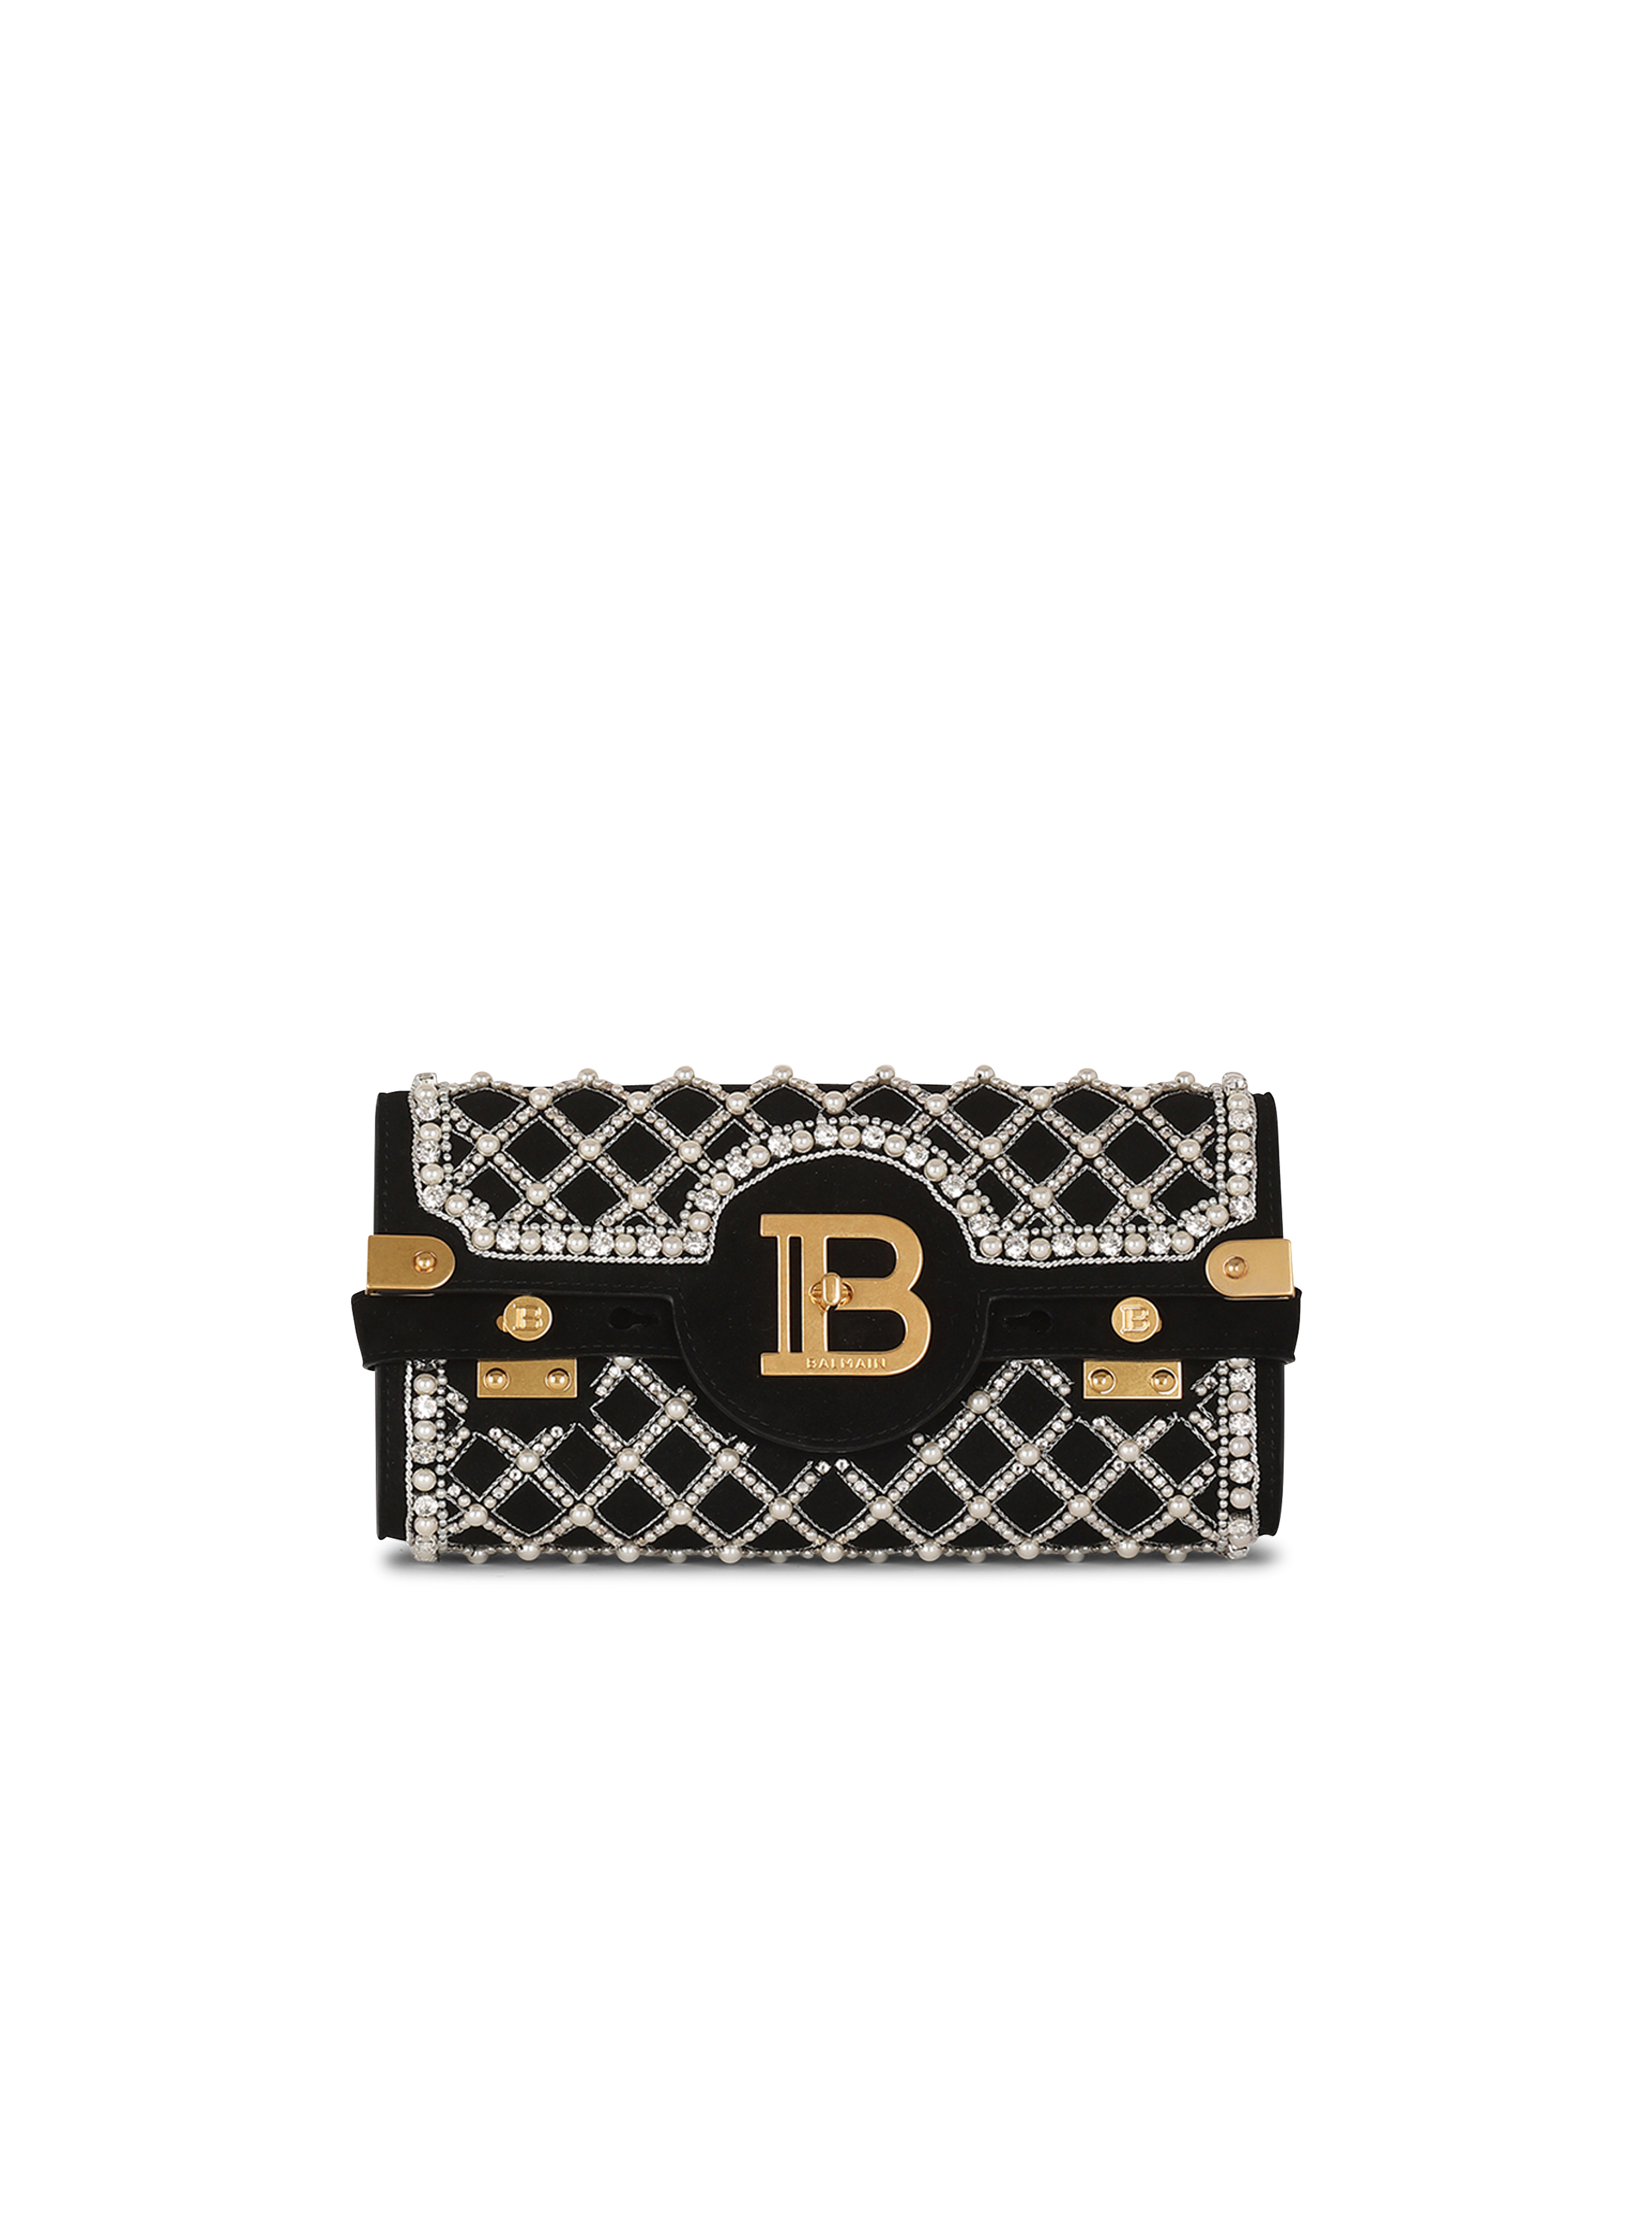 Suede and embroidered pearl B-Buzz 23 clutch bag, black